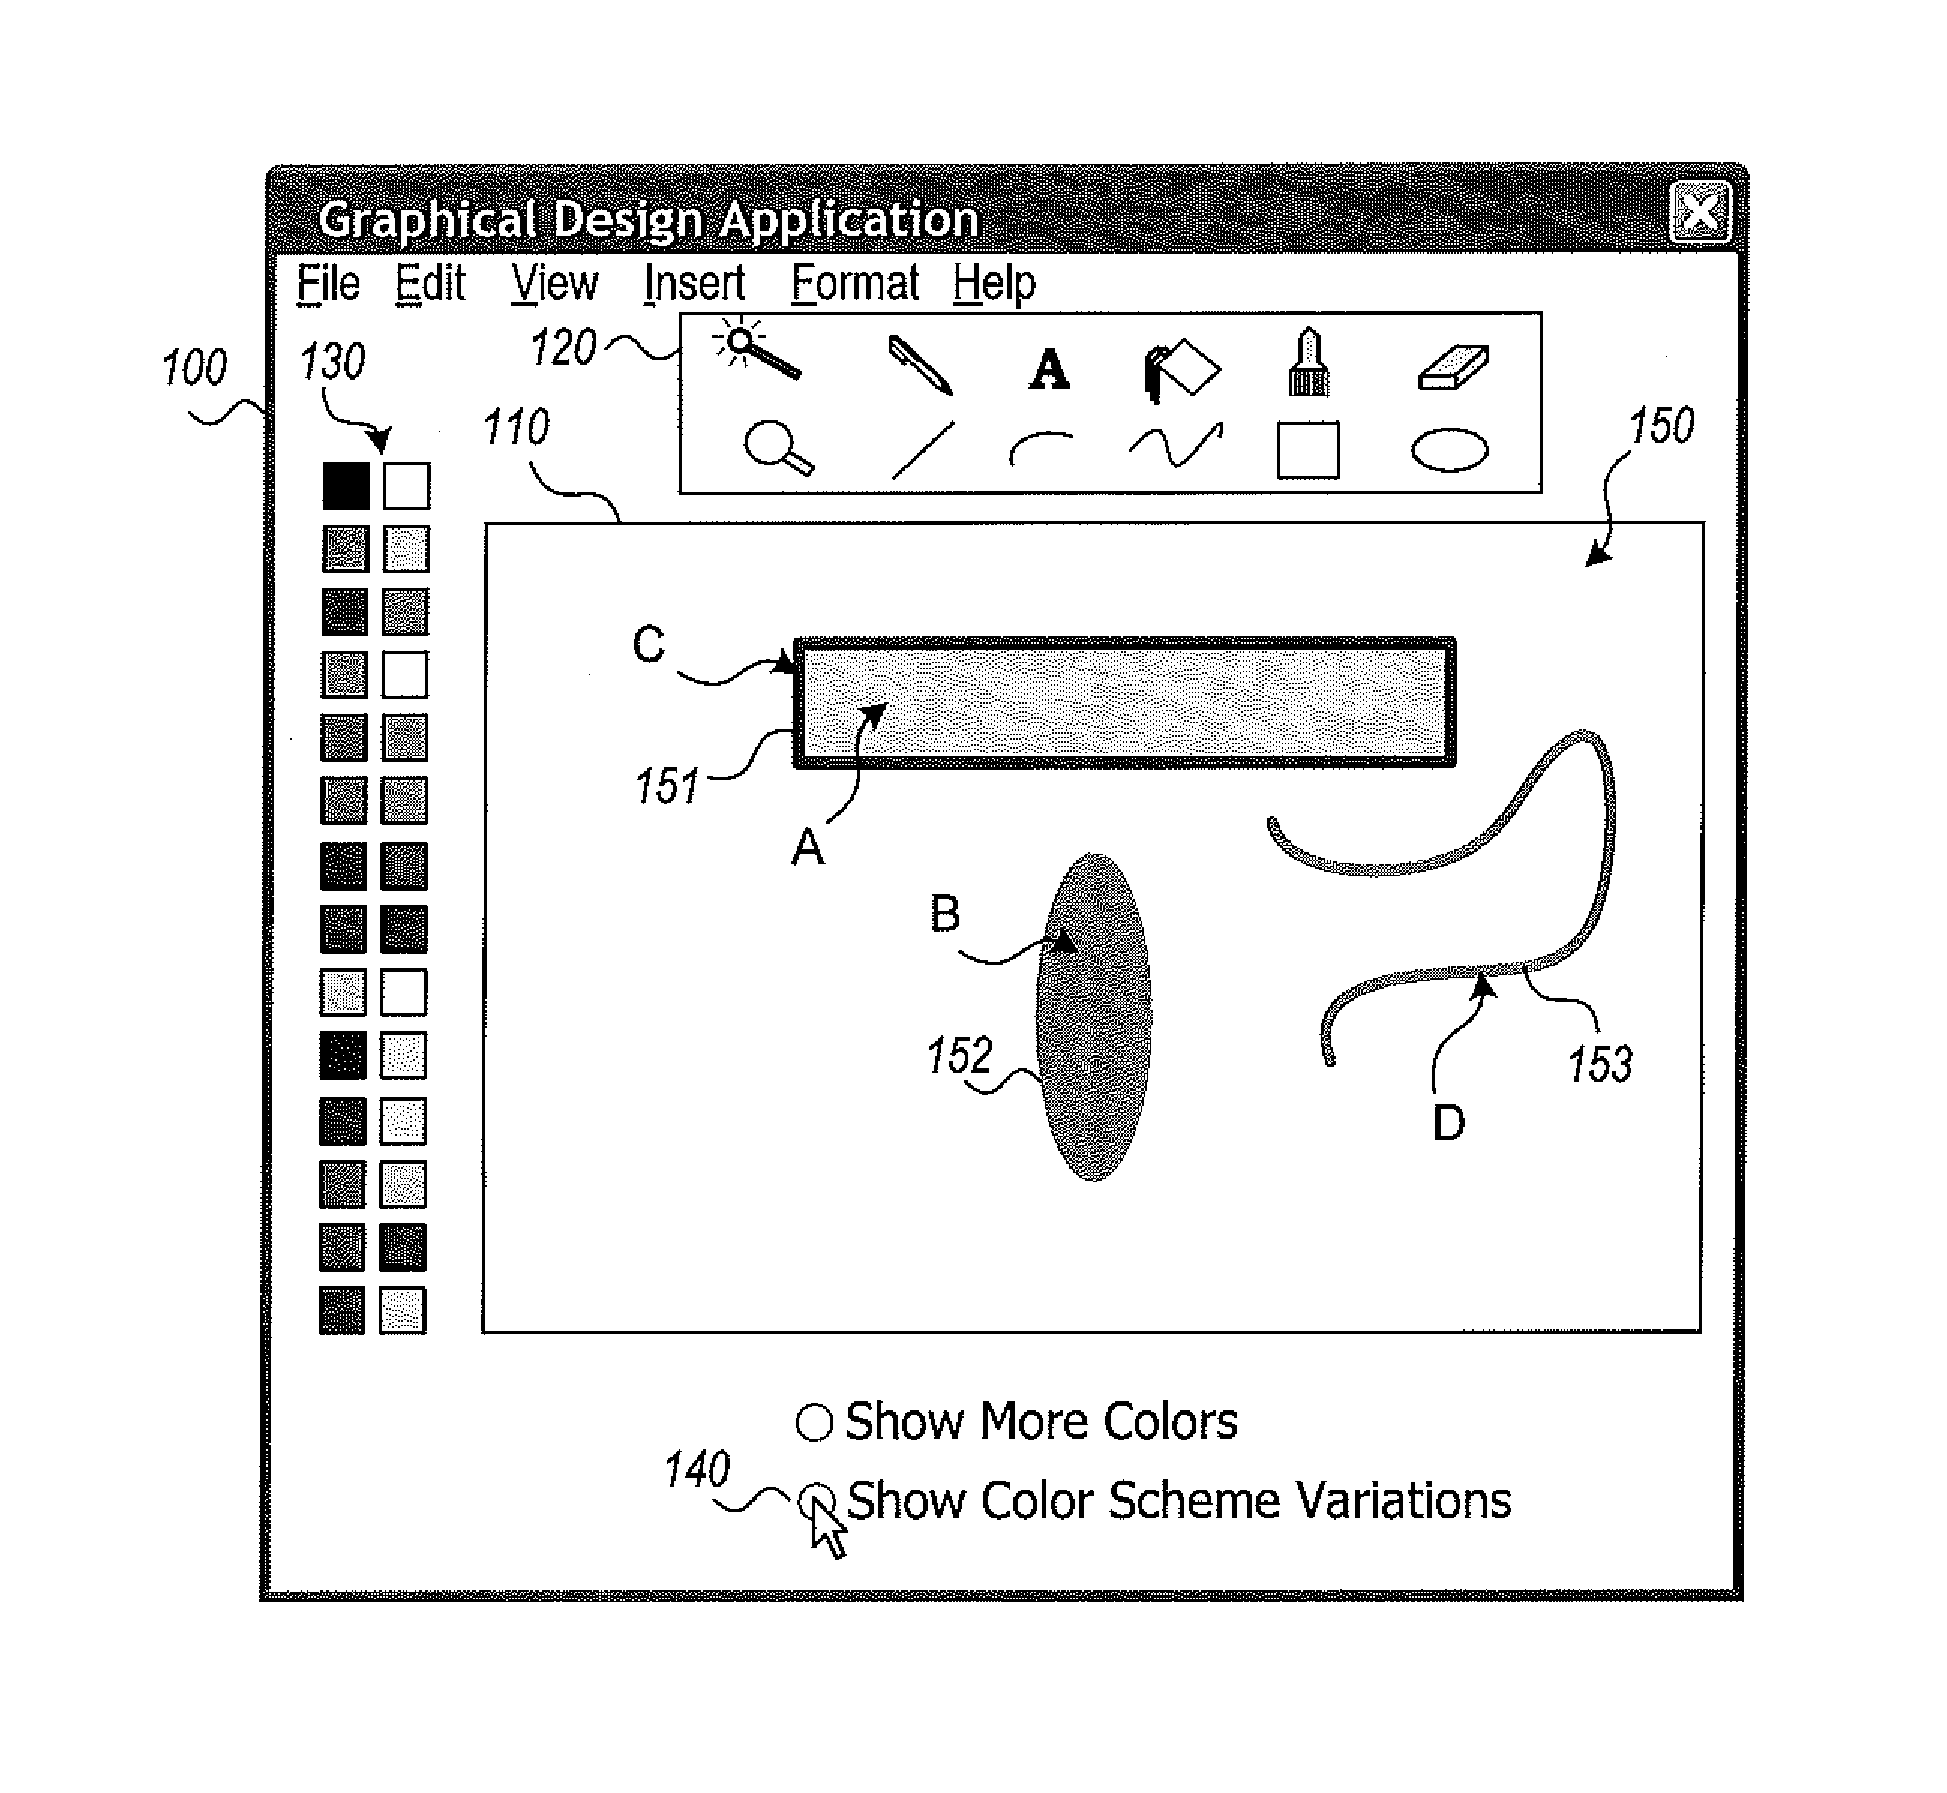 System and method for automatically generating color scheme variations